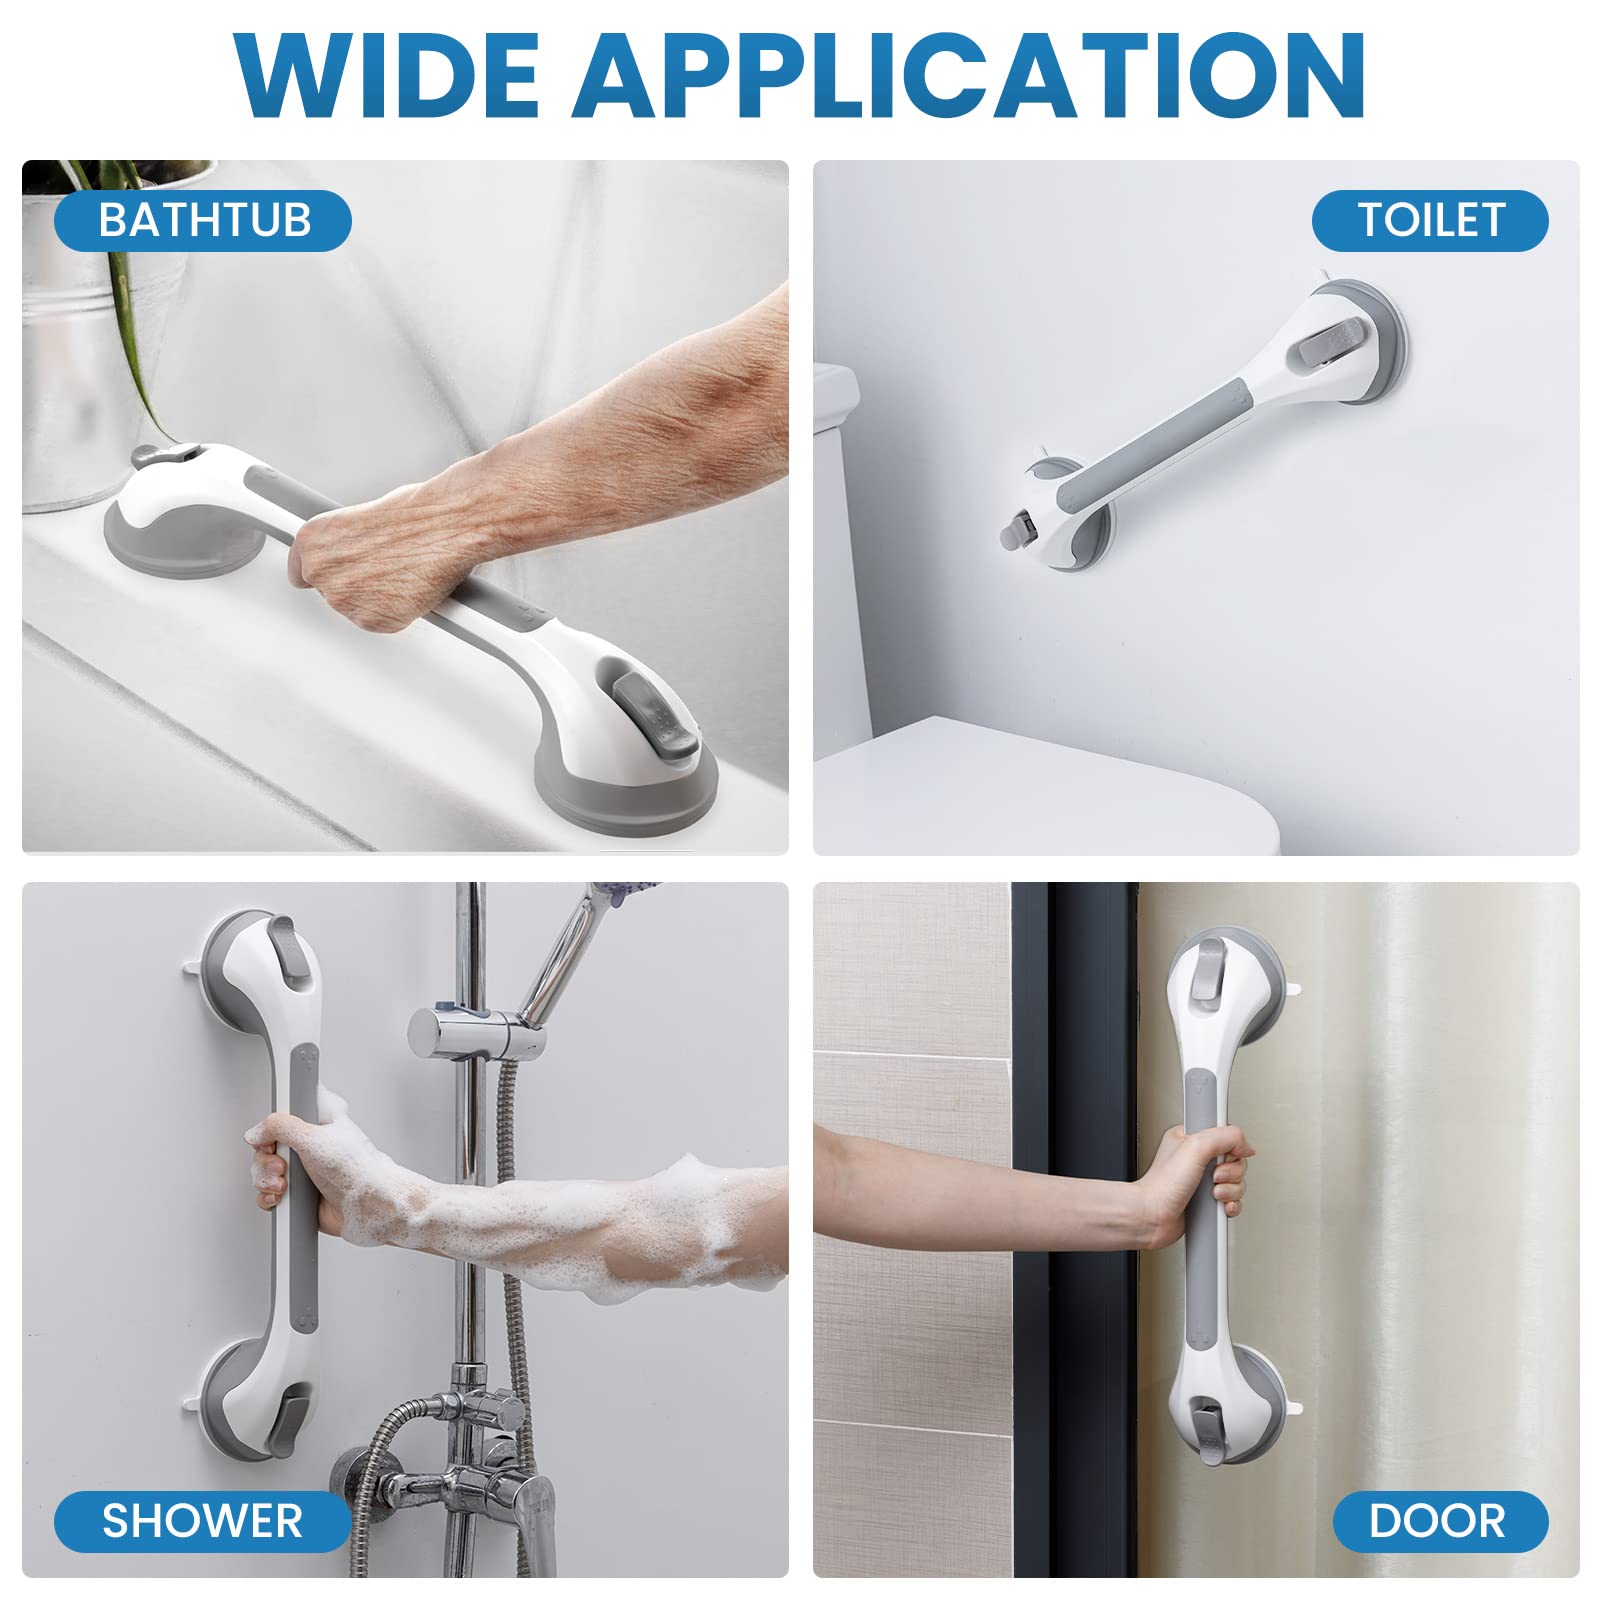 LEVERLOC 2 Pack Shower Grab Bars for Bathtubs and Showers, Easy to Install Suction Shower Handles for Bathroom Removable Handrails for Seniors Elderly Heavy Duty Safety Grip Waterproof Drill Free Gray